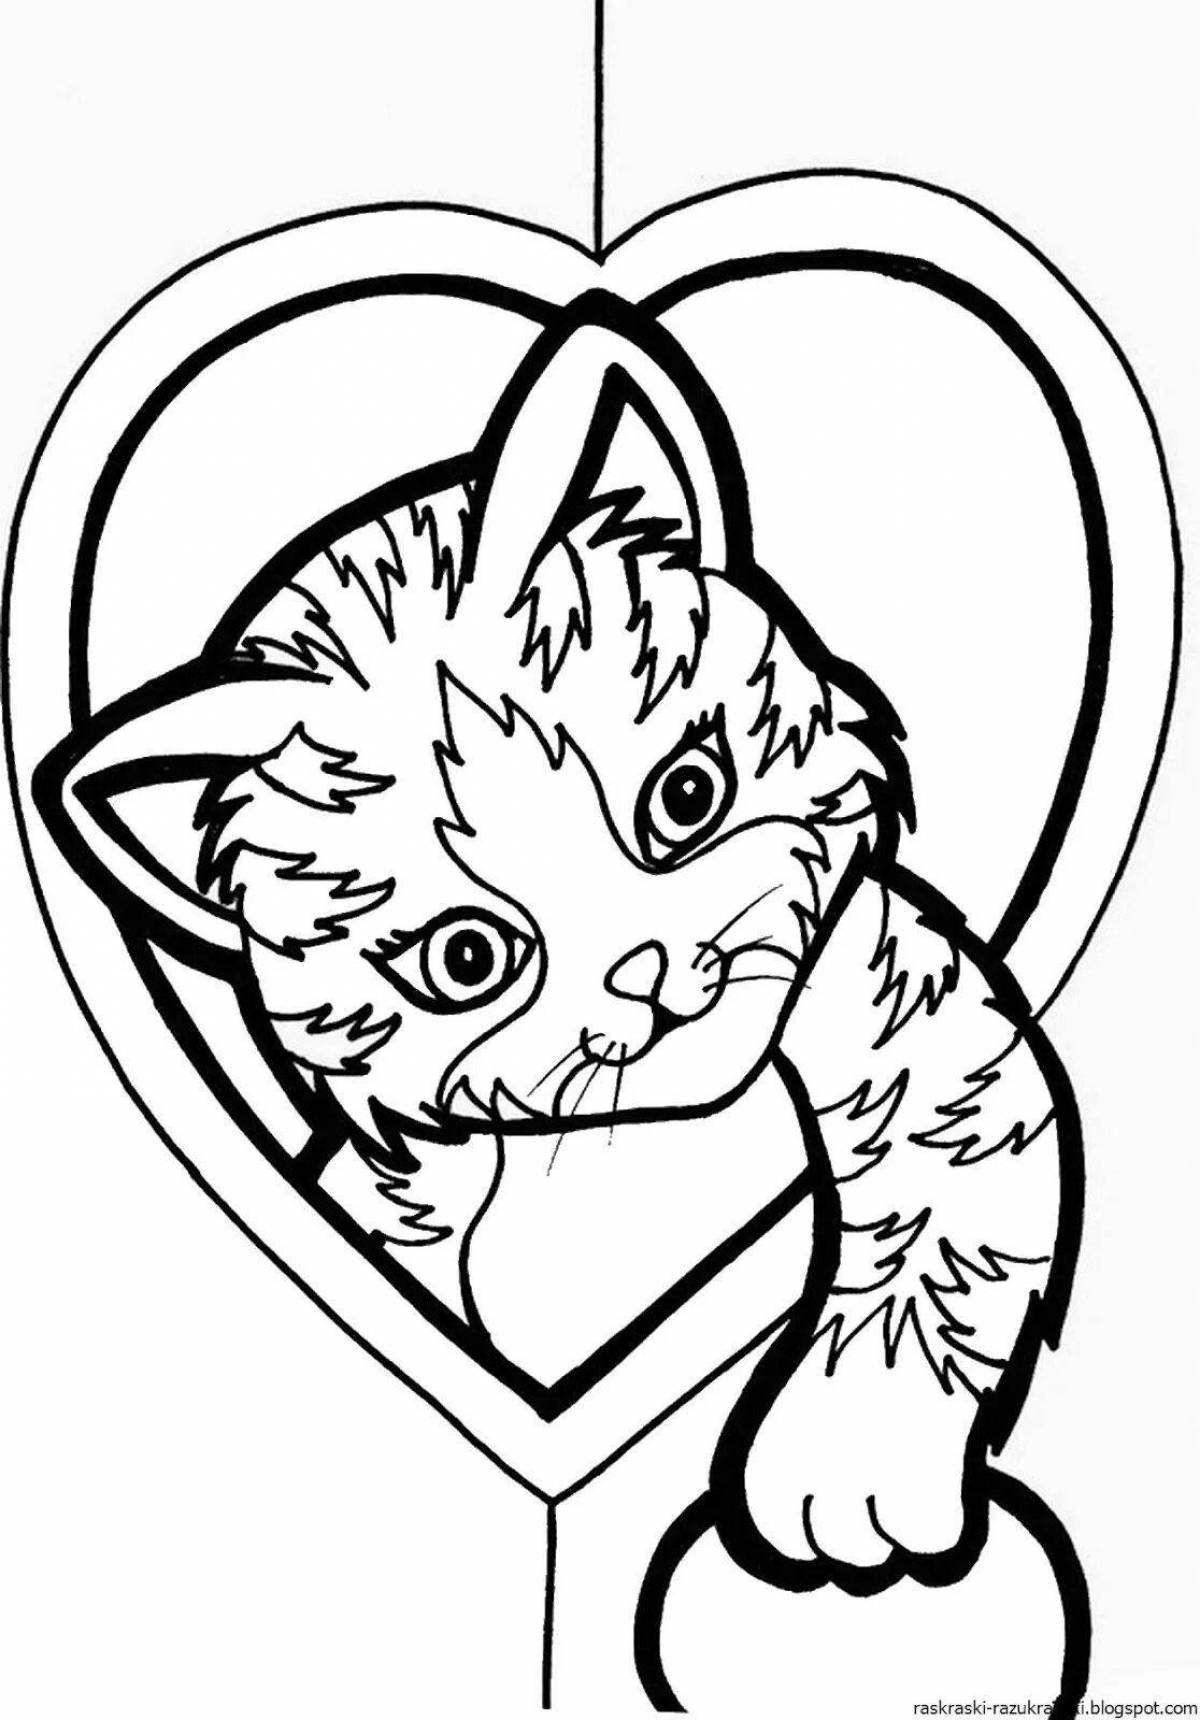 Snuggable kittens coloring page